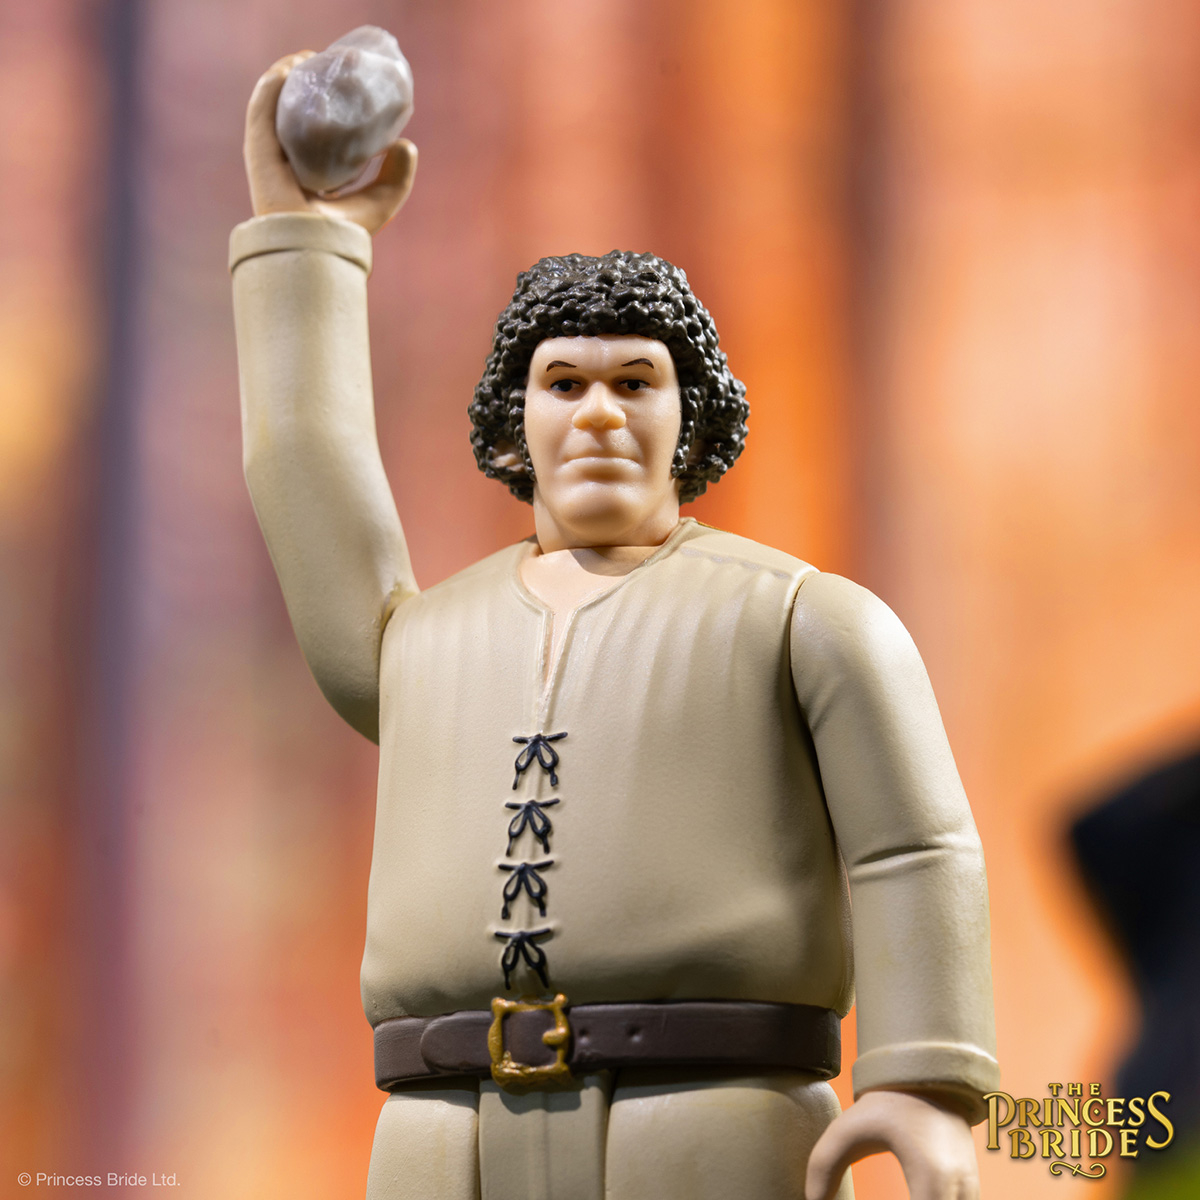 Is it Fezzik’s fault that he’s the biggest and strongest even if he doesn’t even exercise? Collect The Princess Bride ReAction Figures at Super7.com! bit.ly/47sPHuy #Super7 #ThePrincessBride